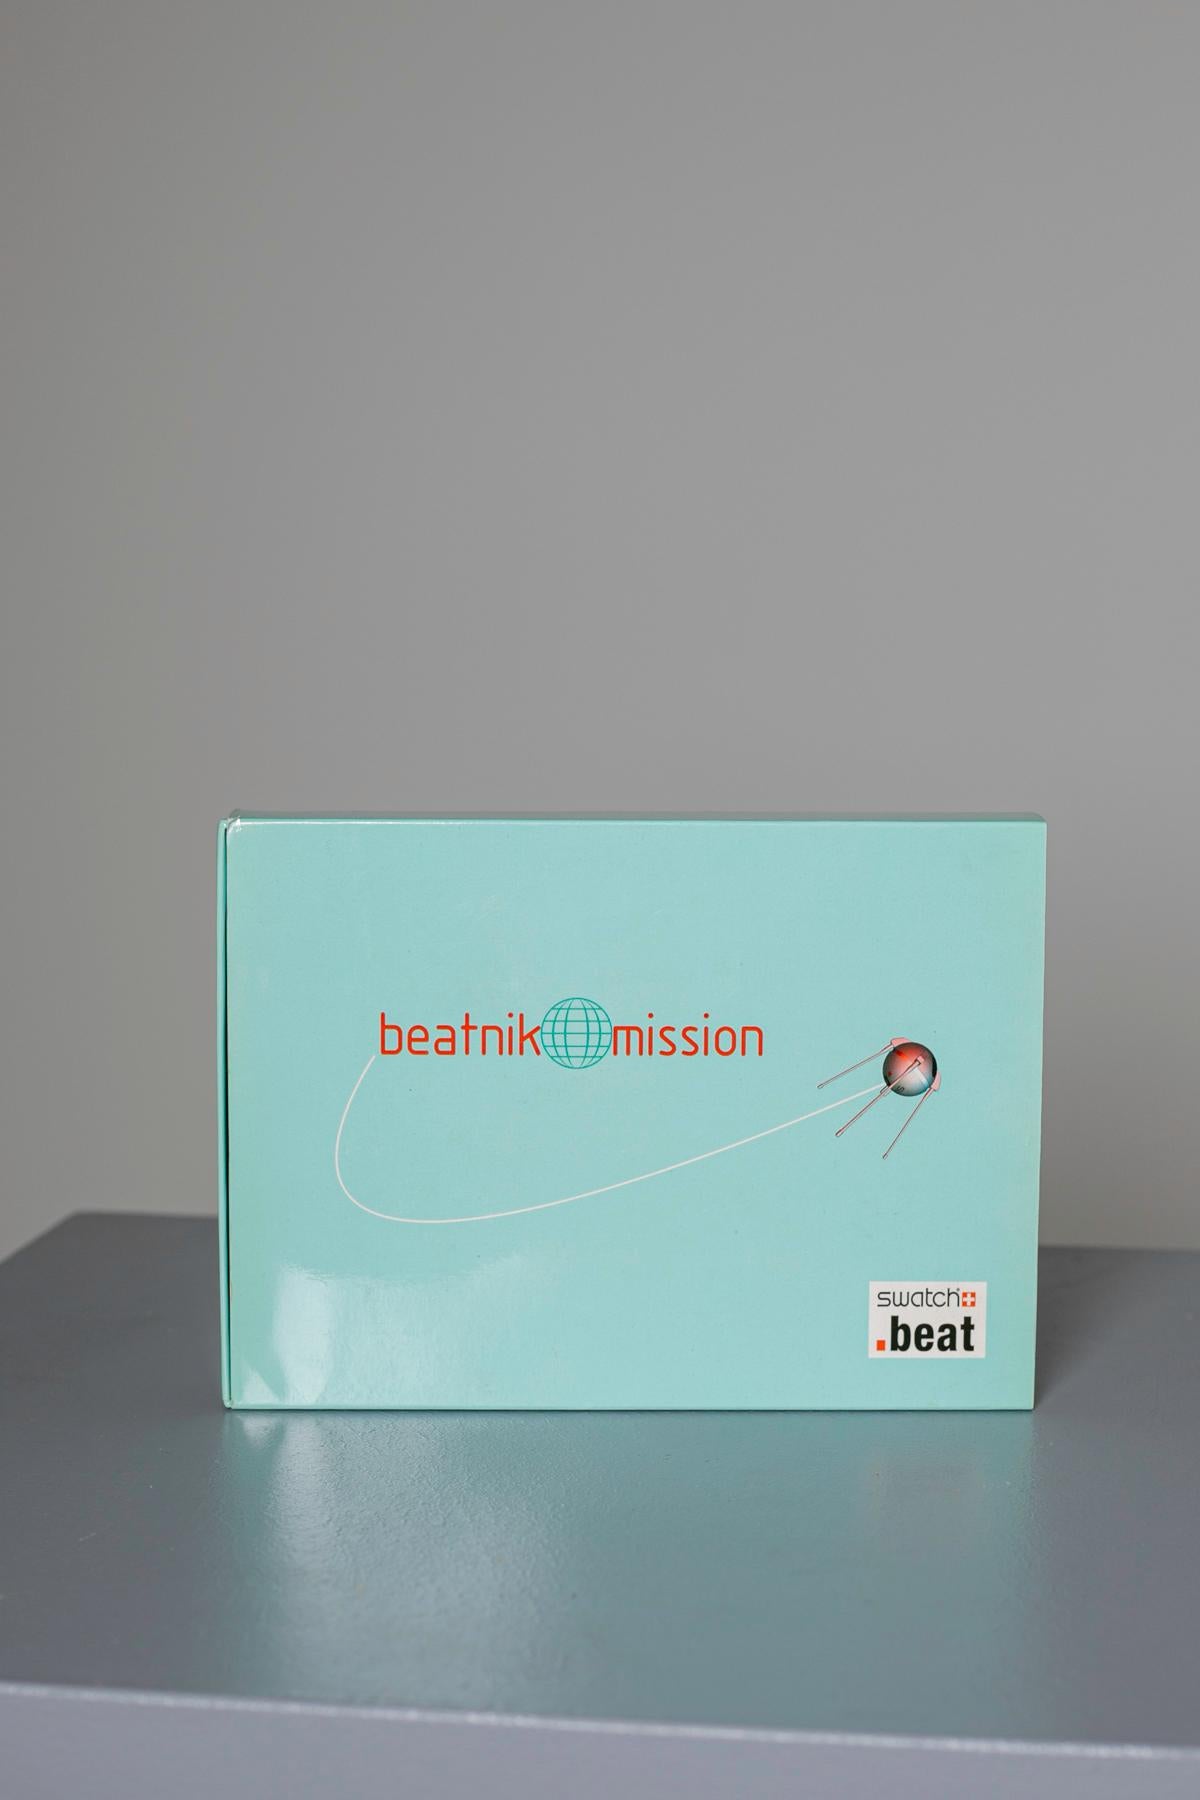 Beatnik Mission Swatch Unisex in Limited Edition, 1999 In Excellent Condition For Sale In Milano, IT